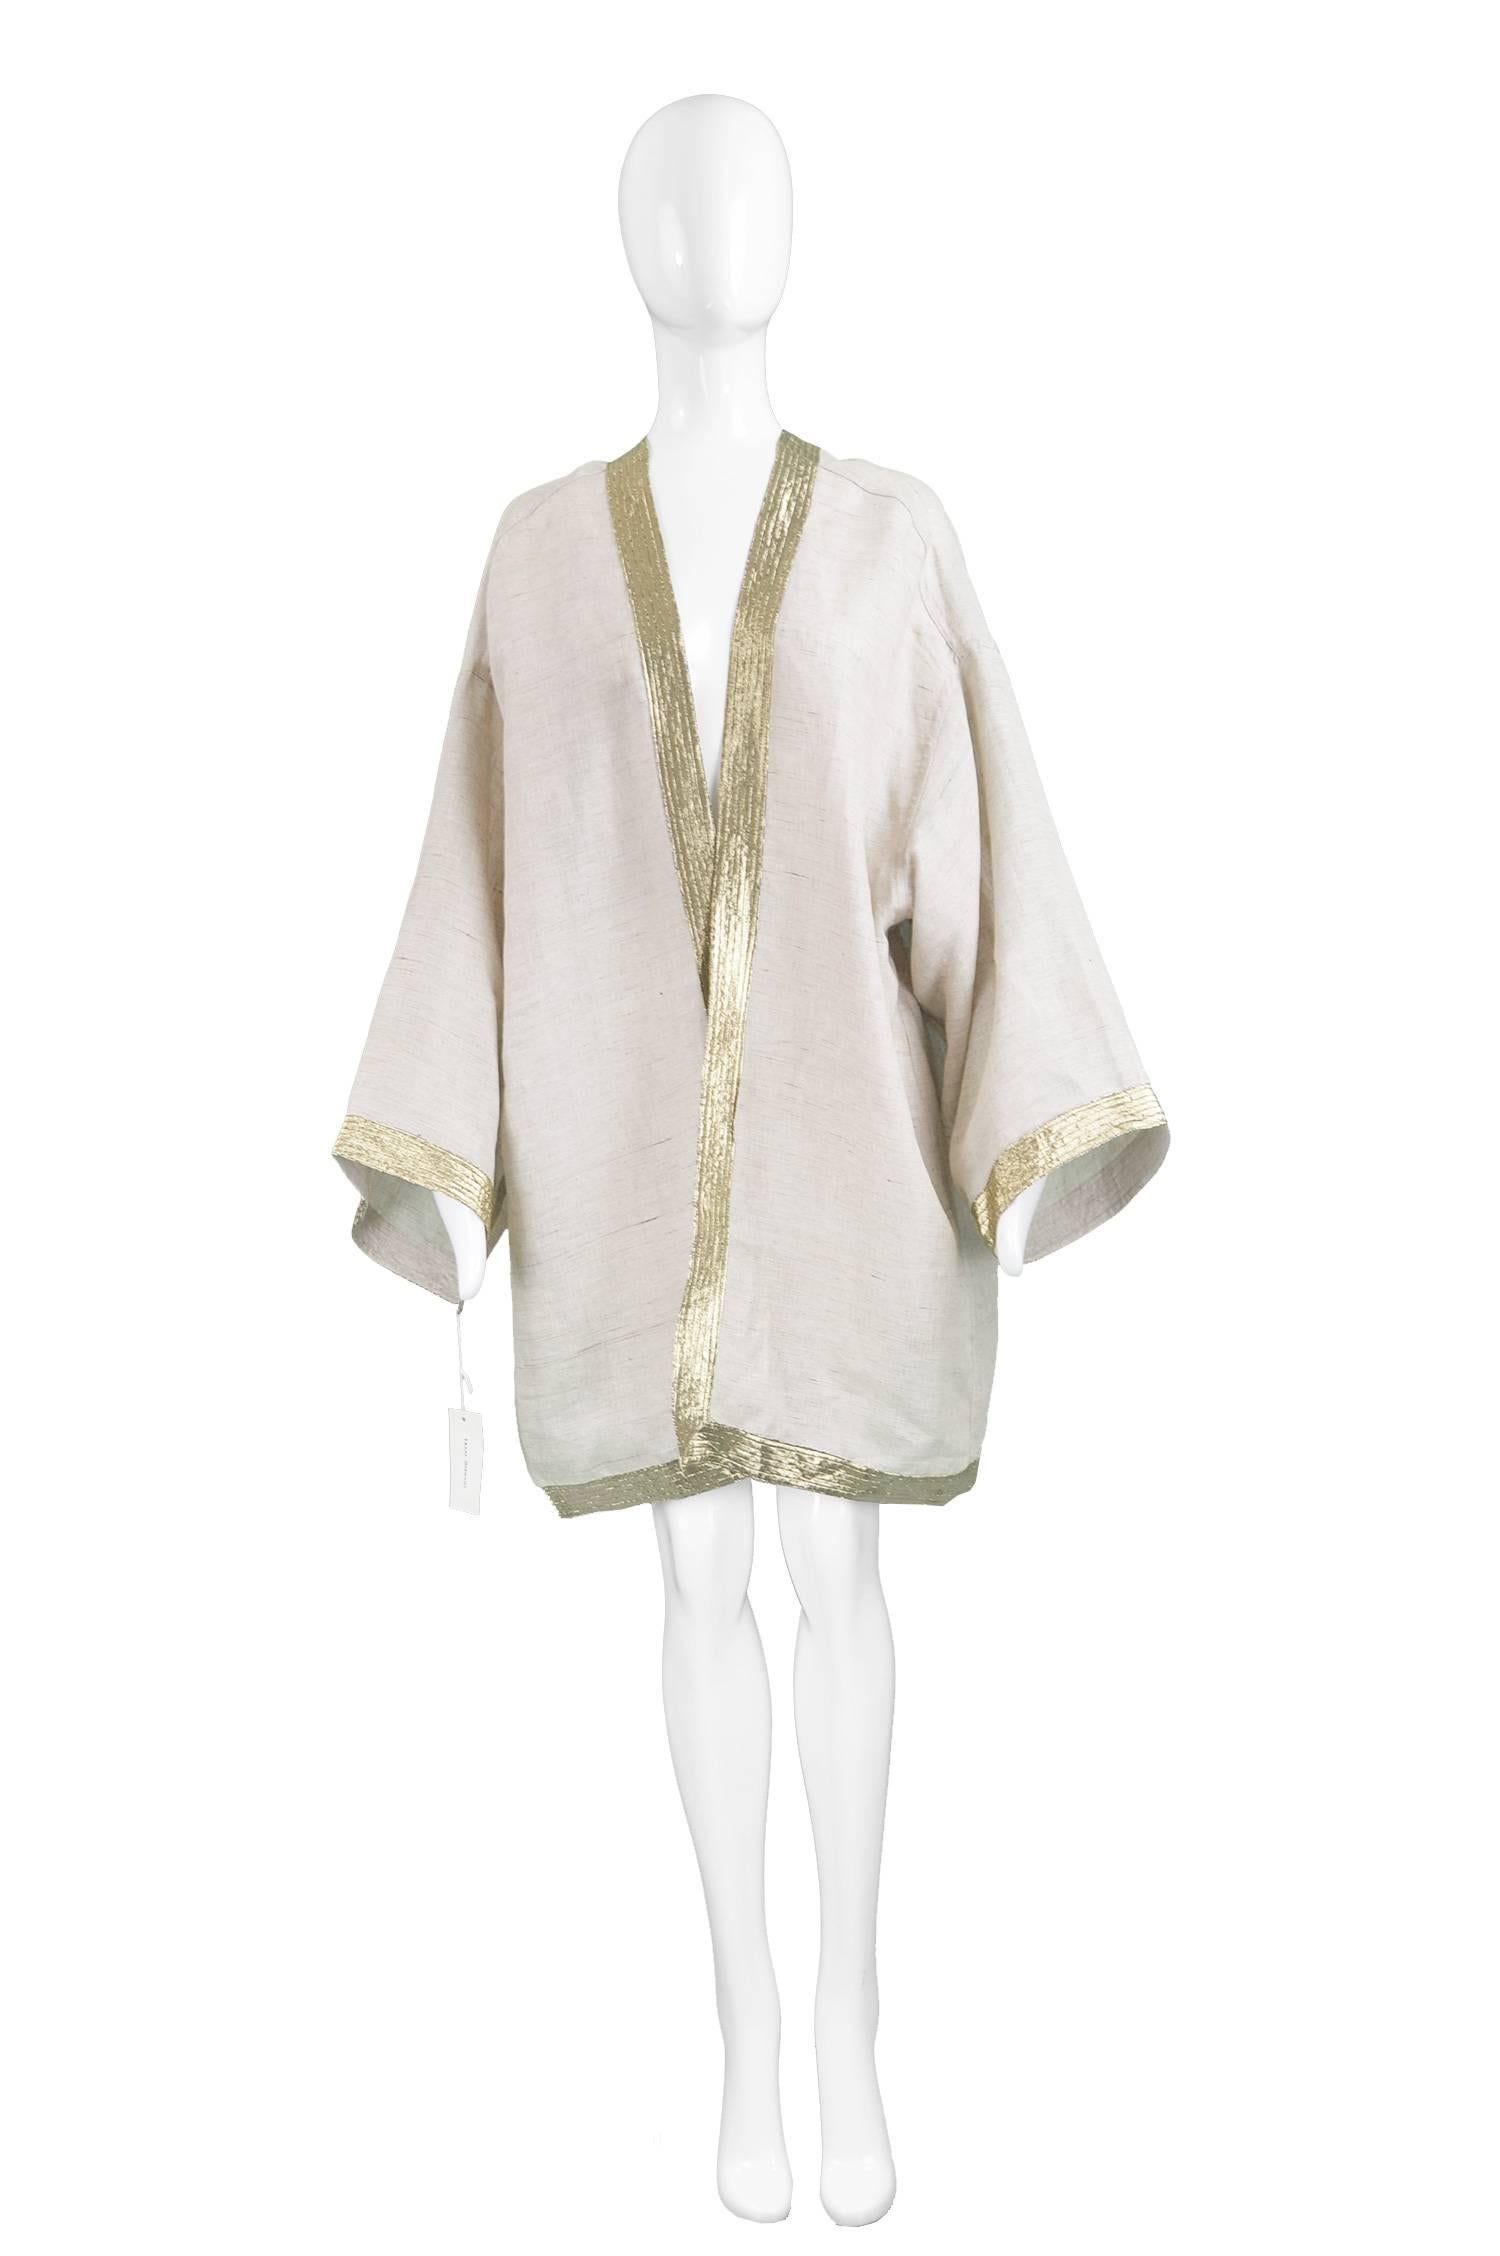 Isaac Mizrahi Vintage Beige Linen & Gold Lamé Kimono Jacket, 1990s

Size: One Size fits All.
Bust -Free
Waist - Free
Length (Shoulder to Hem) - 32” / 81cm
Sleeve Pit to Cuff - 15” / 38cm
 
Condition: Unworn with tags. No holes, stains or